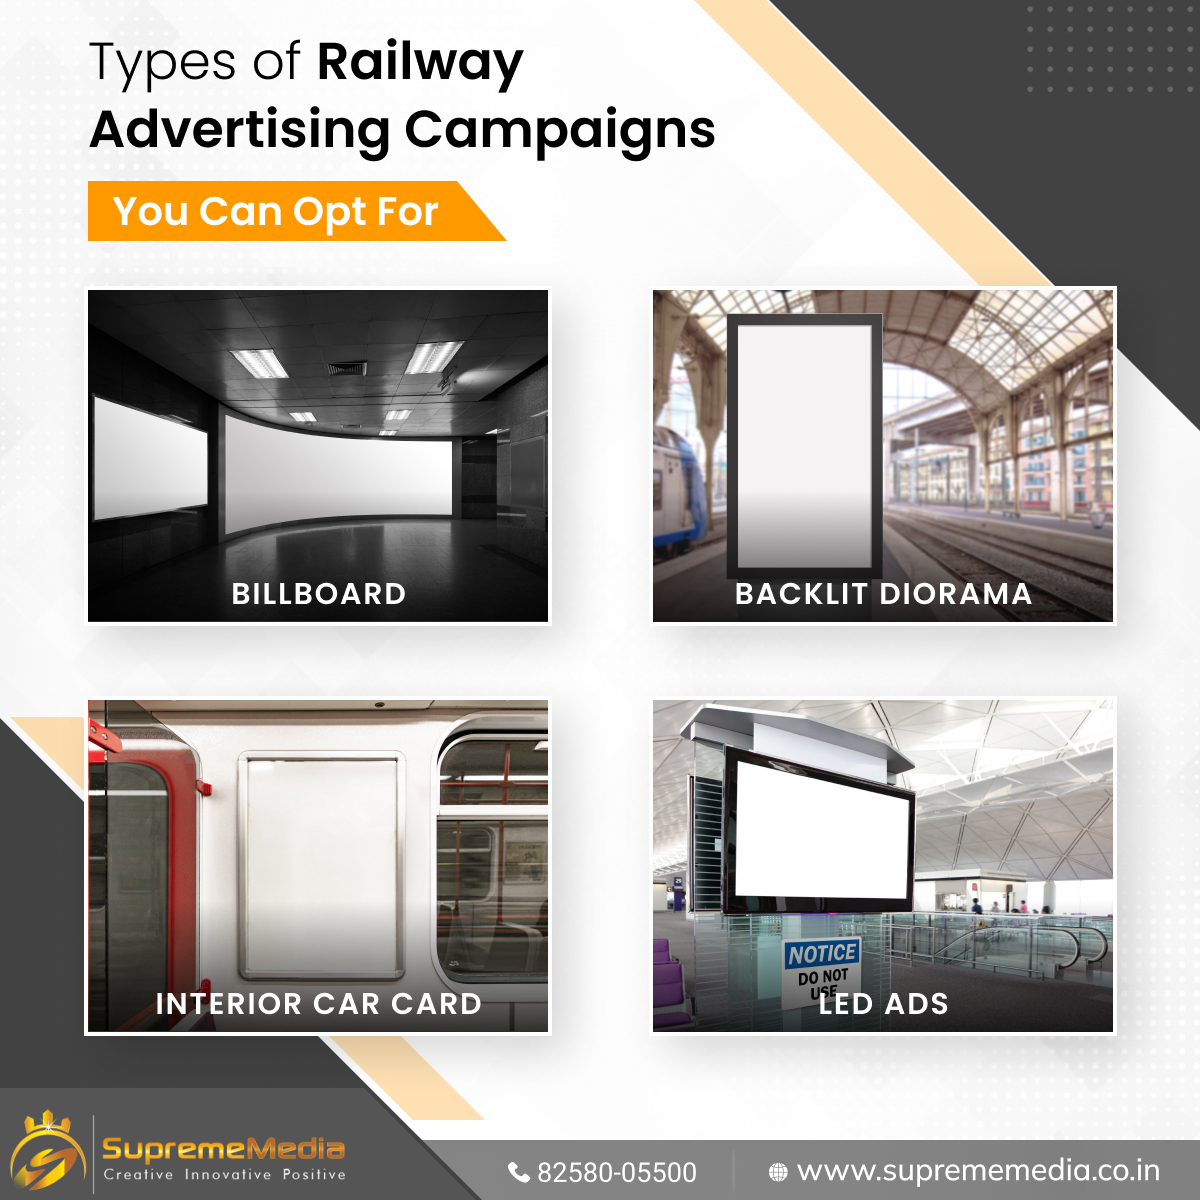 Railway Advertising Campaigns